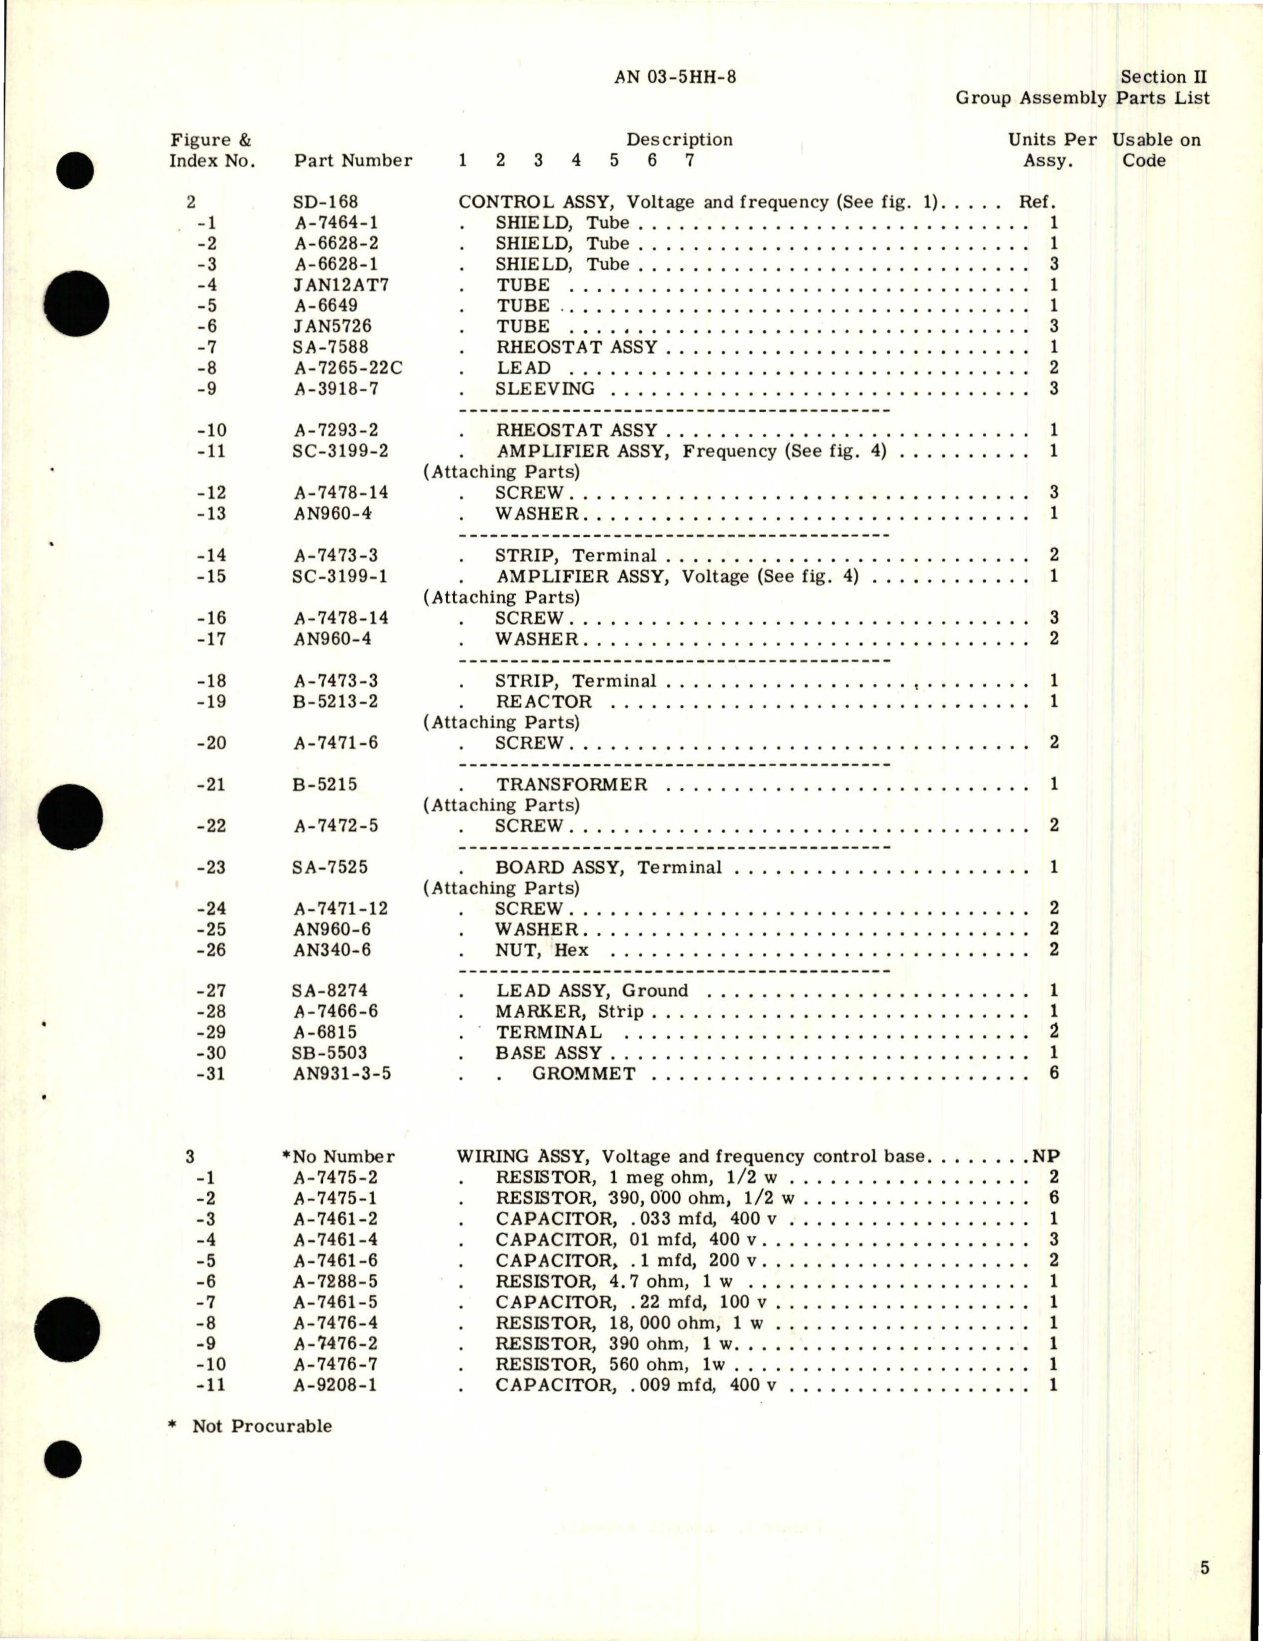 Sample page 9 from AirCorps Library document: Parts Catalog for Inverter - Part SE-1-1R